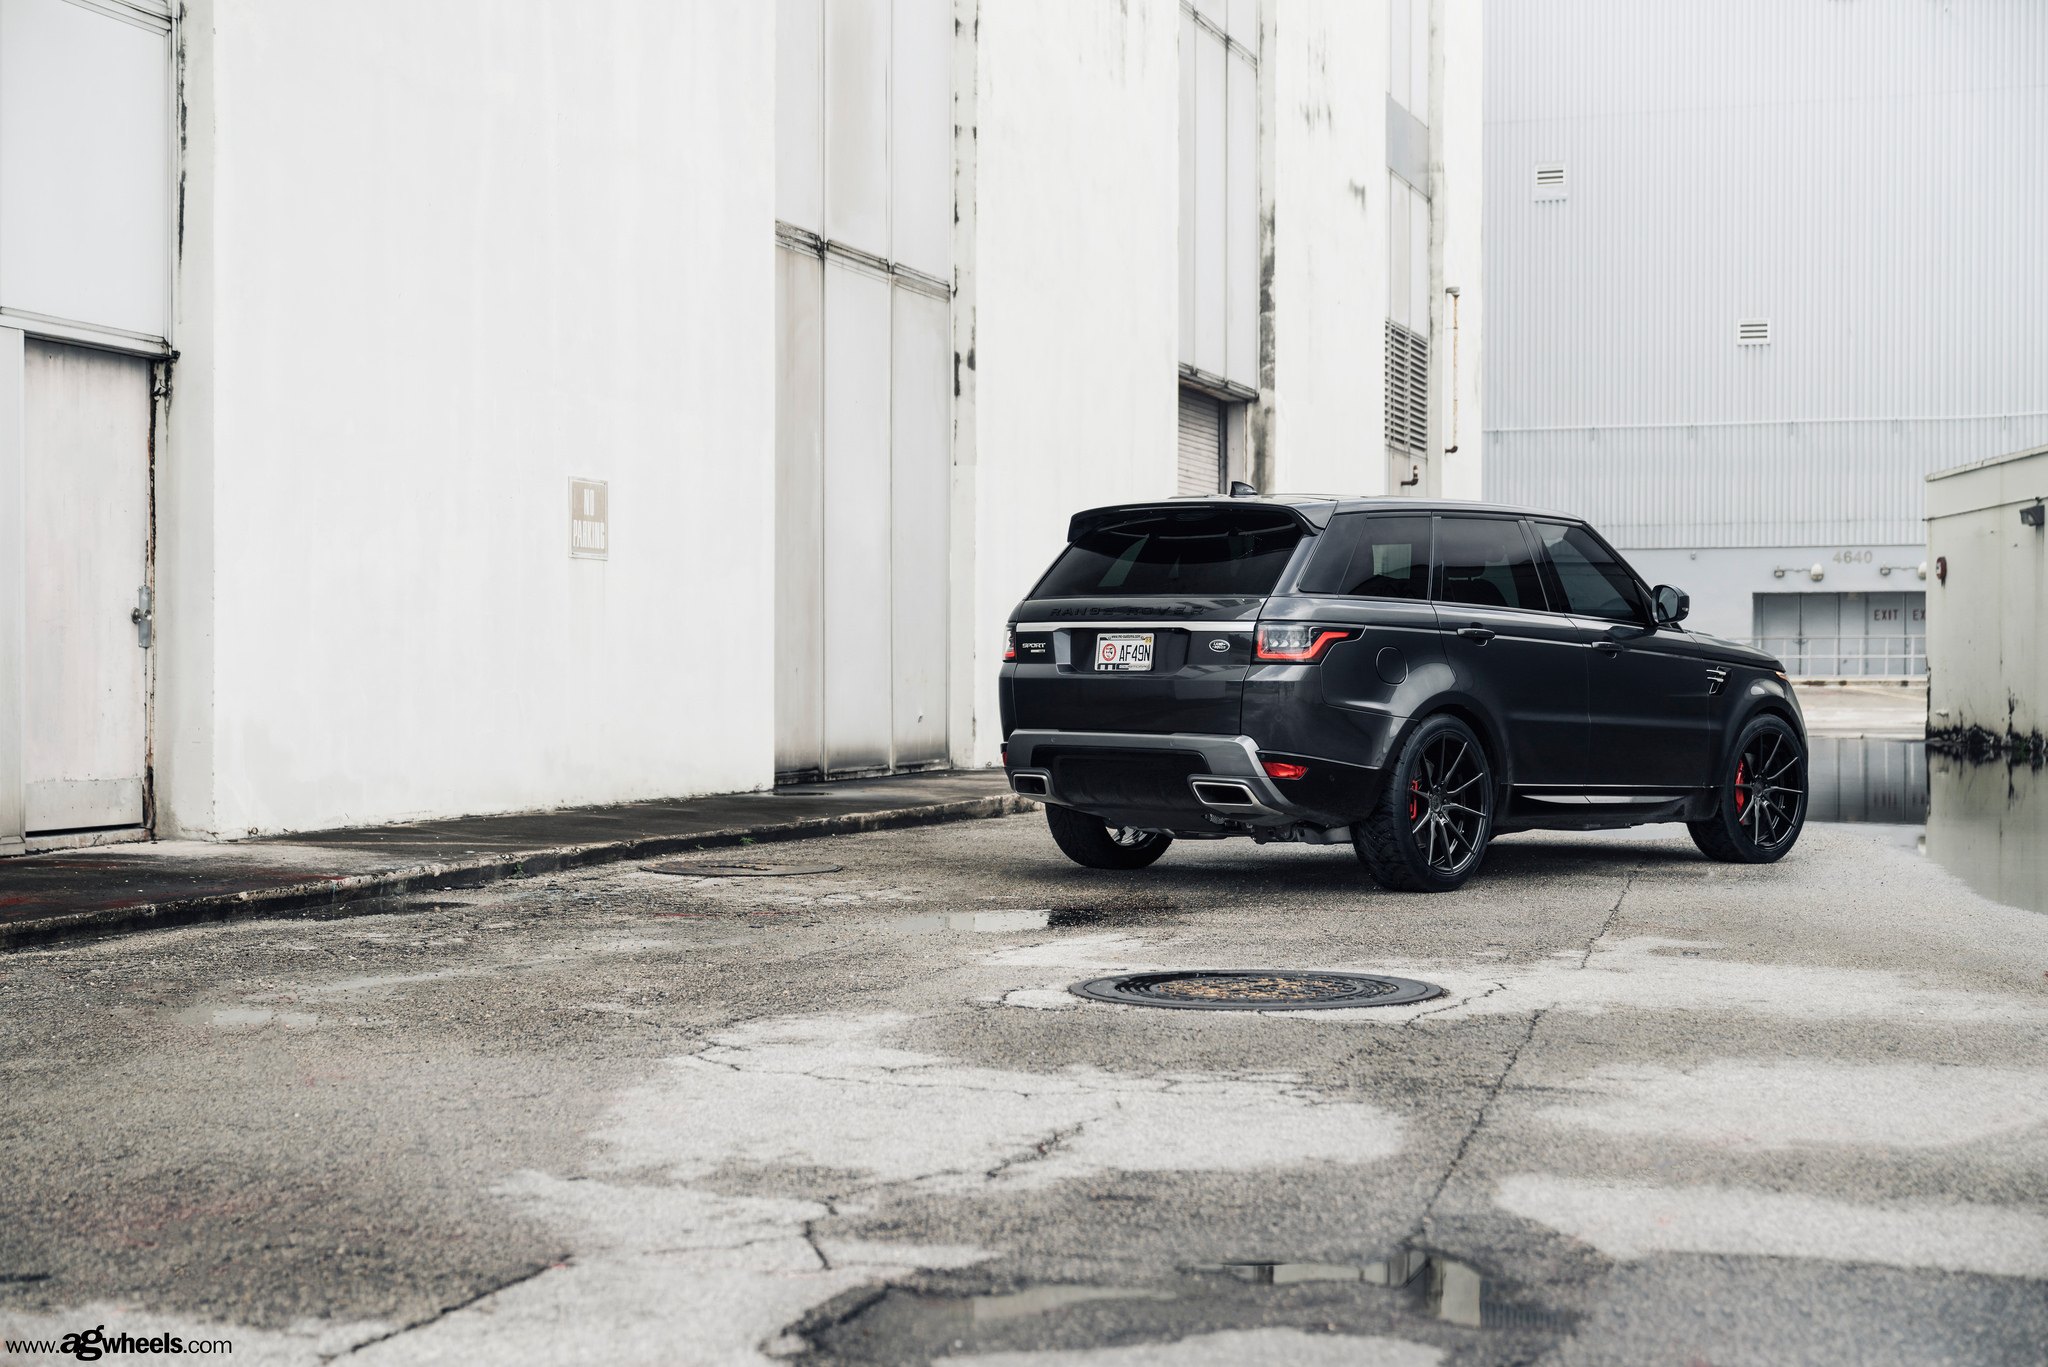 Gray Range Rover Sport with Aftermarket Rear Diffuser - Photo by Avant Garde Wheels